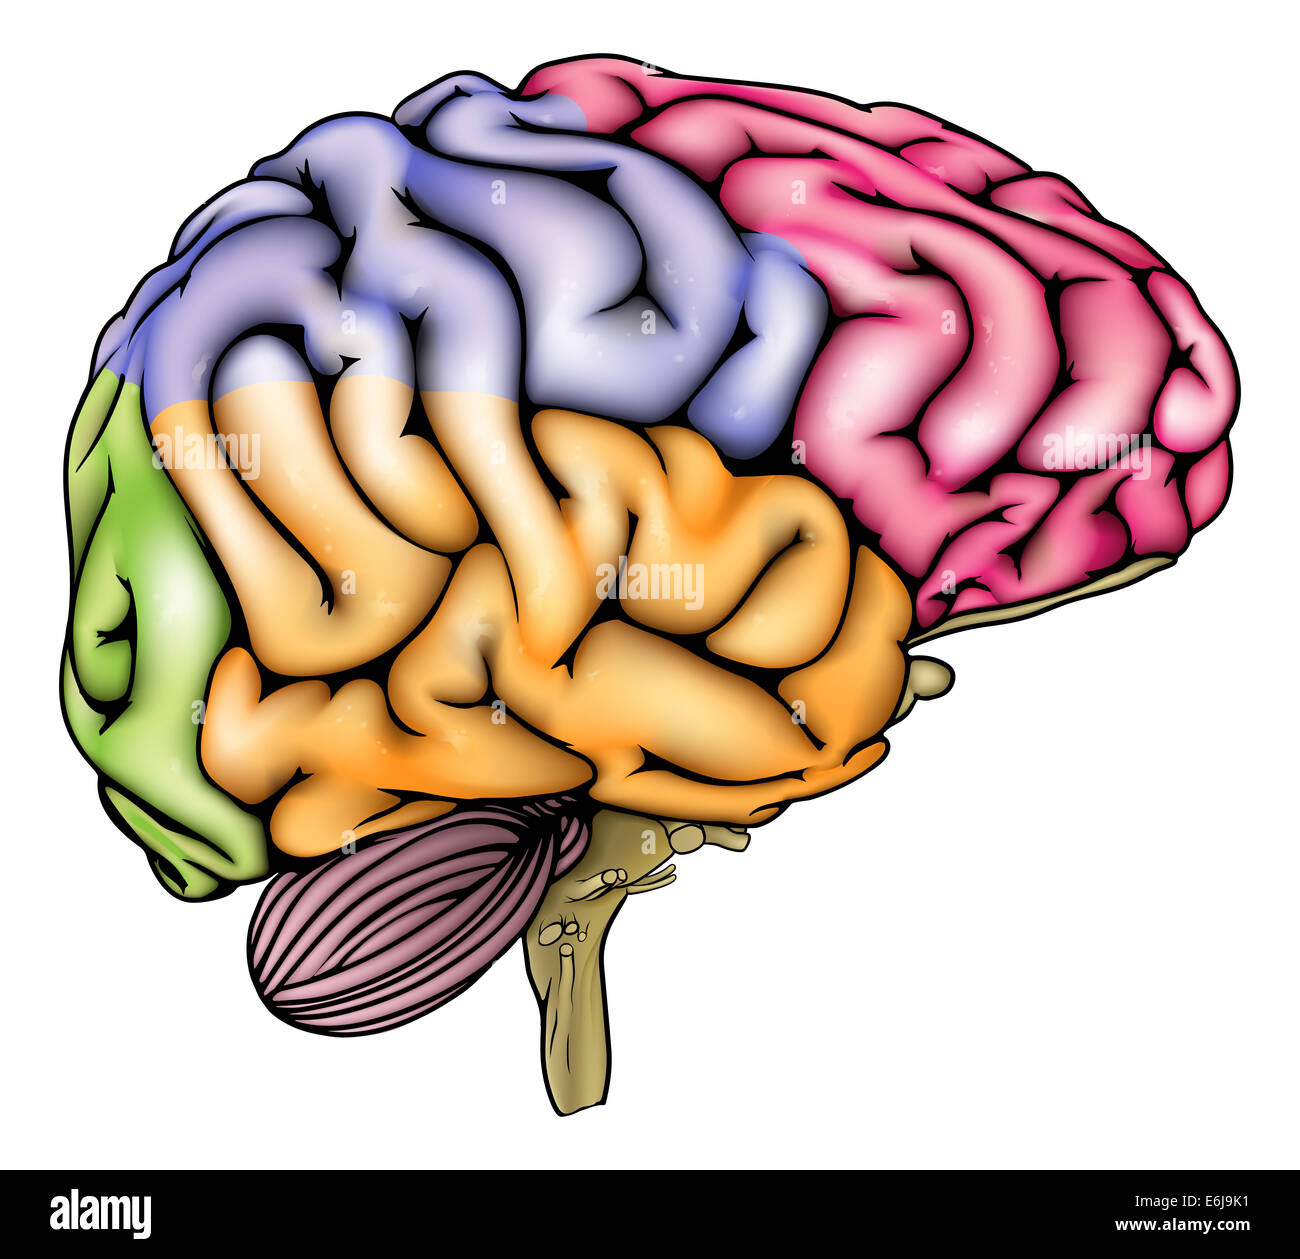 An illustration or anatomy diagram of an anatomically correct human brain with different sections in different colors Stock Photo